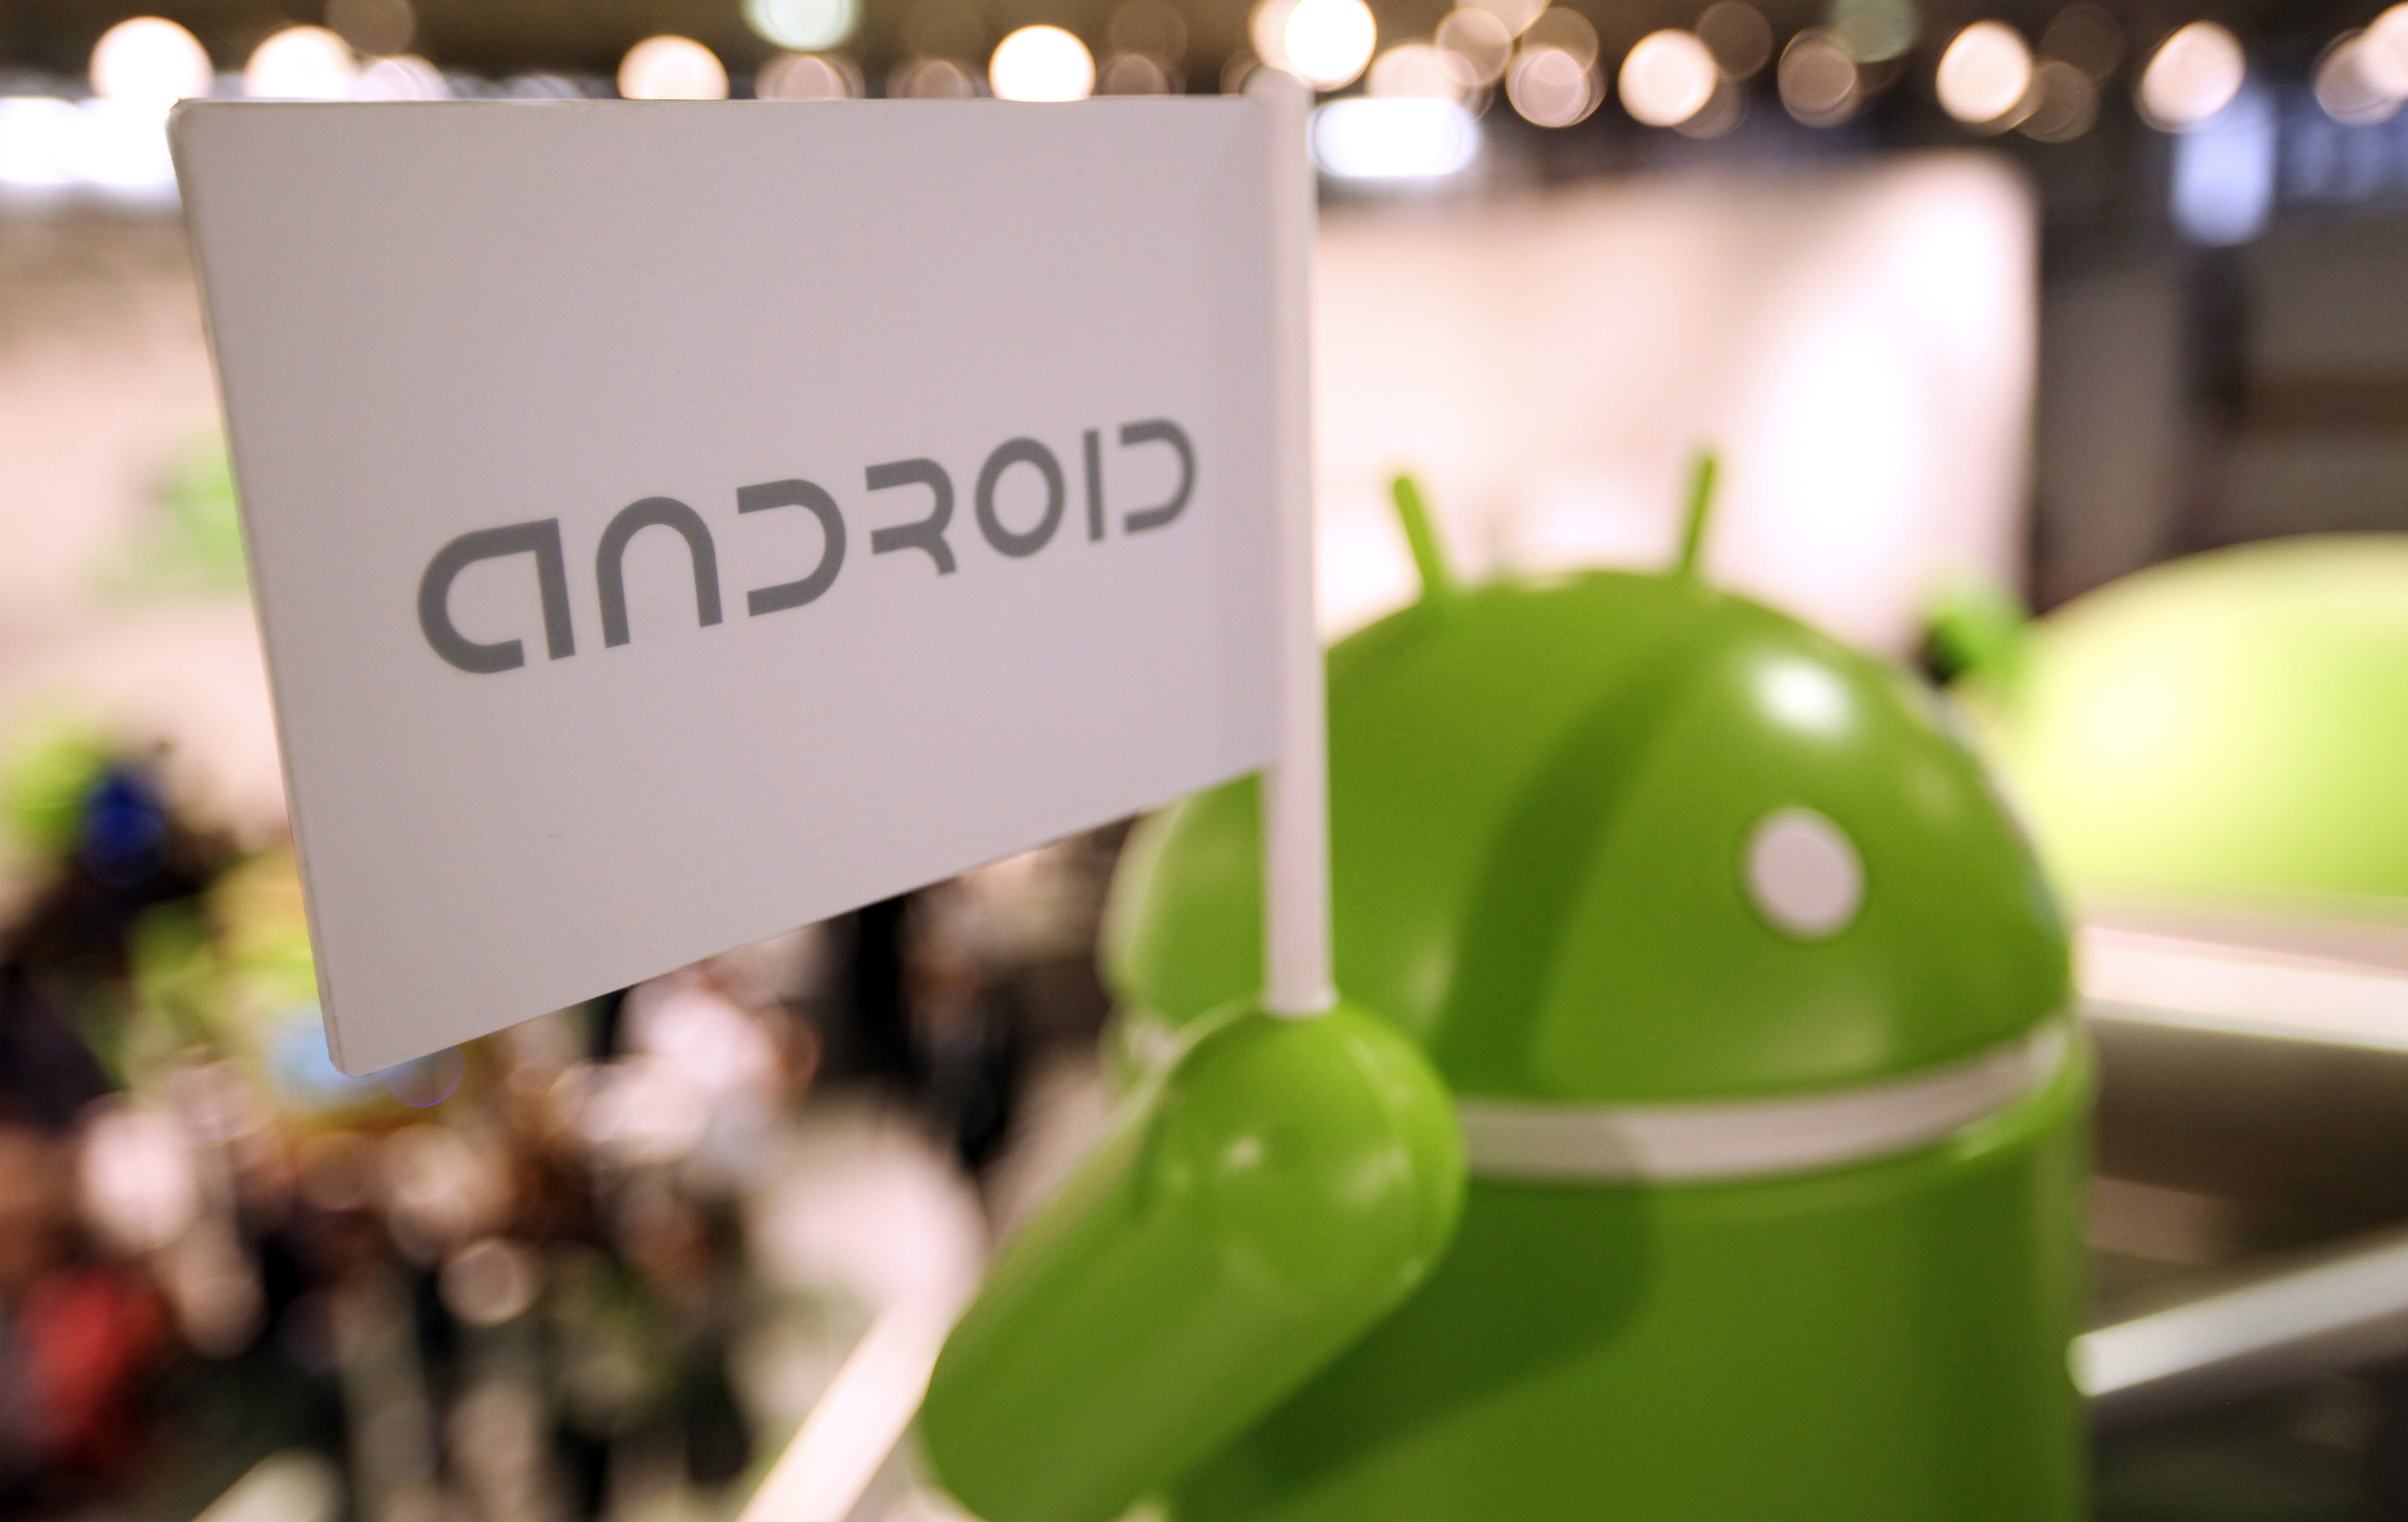 A model of the Android operating system logo at the Mobile World Congress in Barcelona, Spain, on Feb. 27, 2012. (Bloomberg via Getty Images)